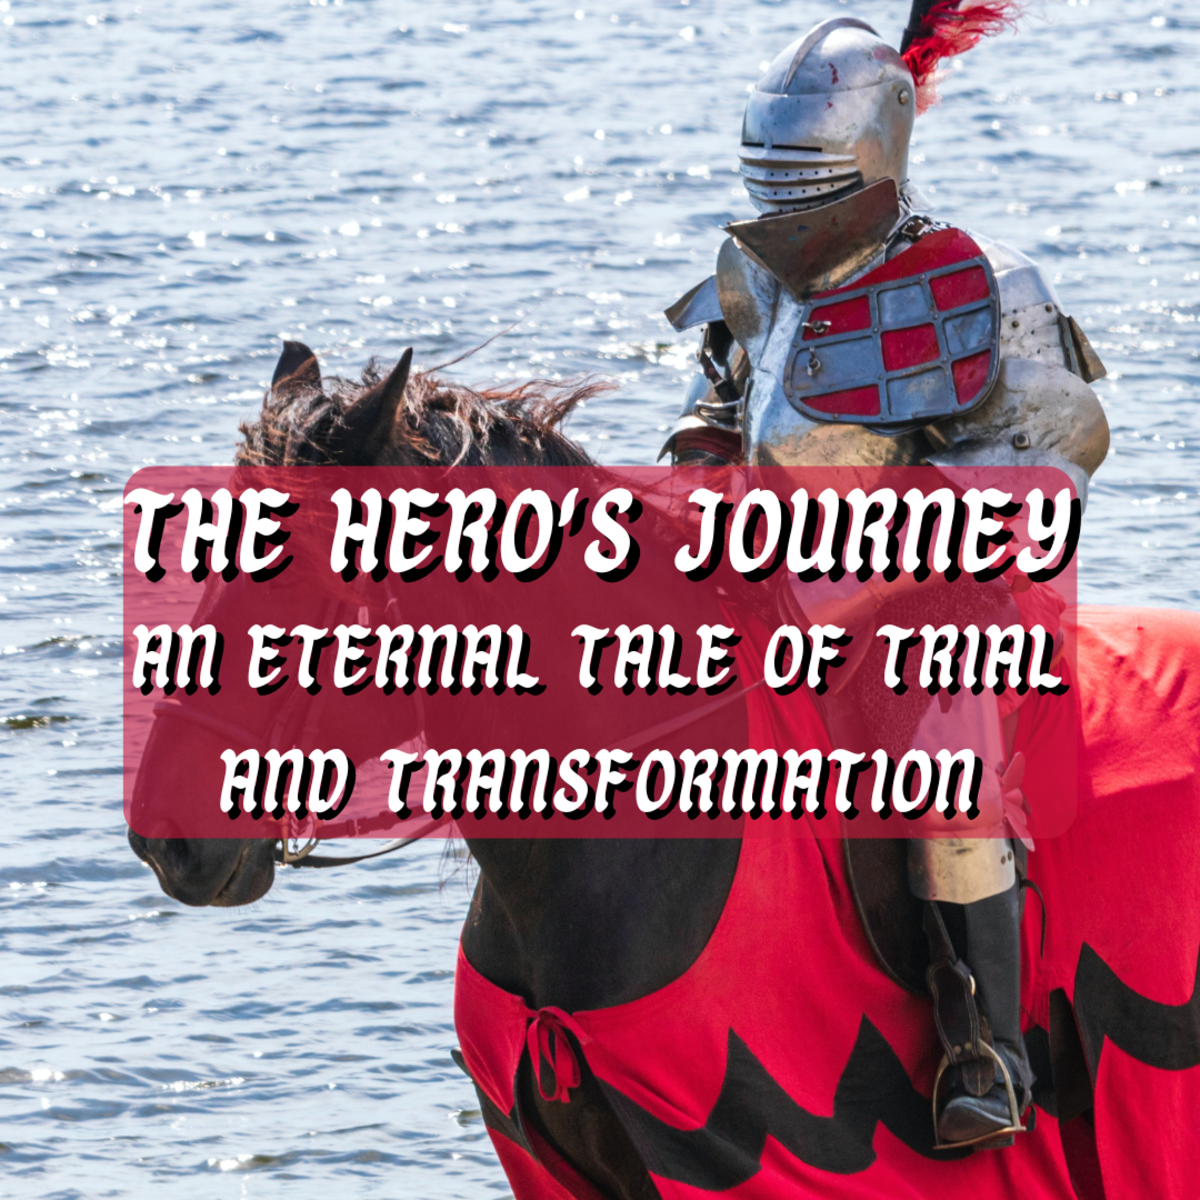 Read on to learn more about what Joseph Campbell called "The Hero's Journey".